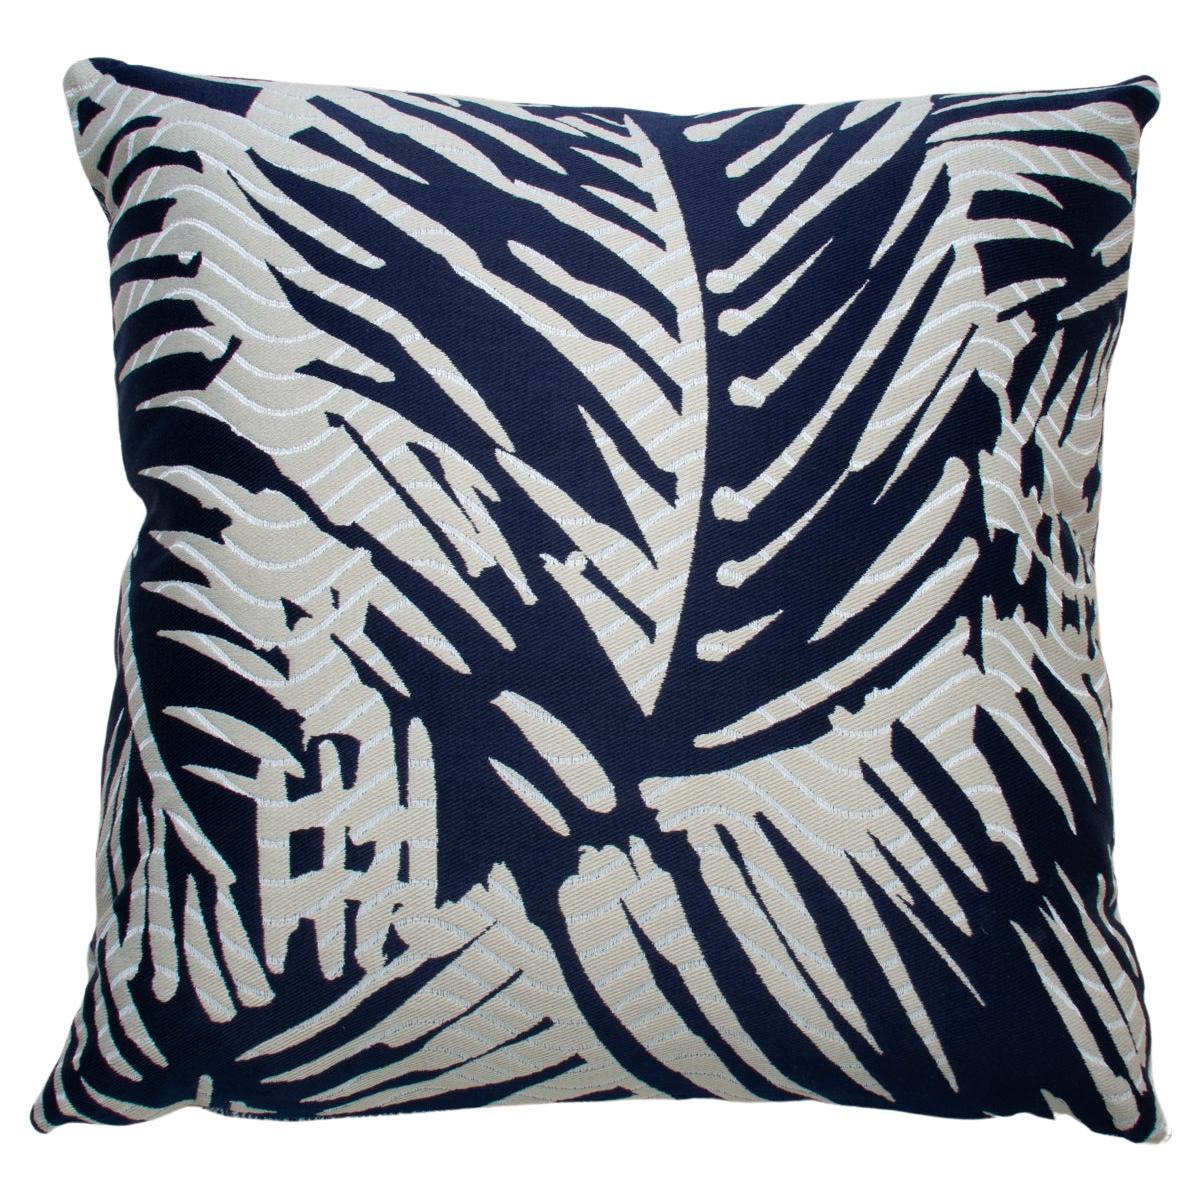 Hermes Pillow Feuillage Vague in Navy, Diamond Backing For Sale